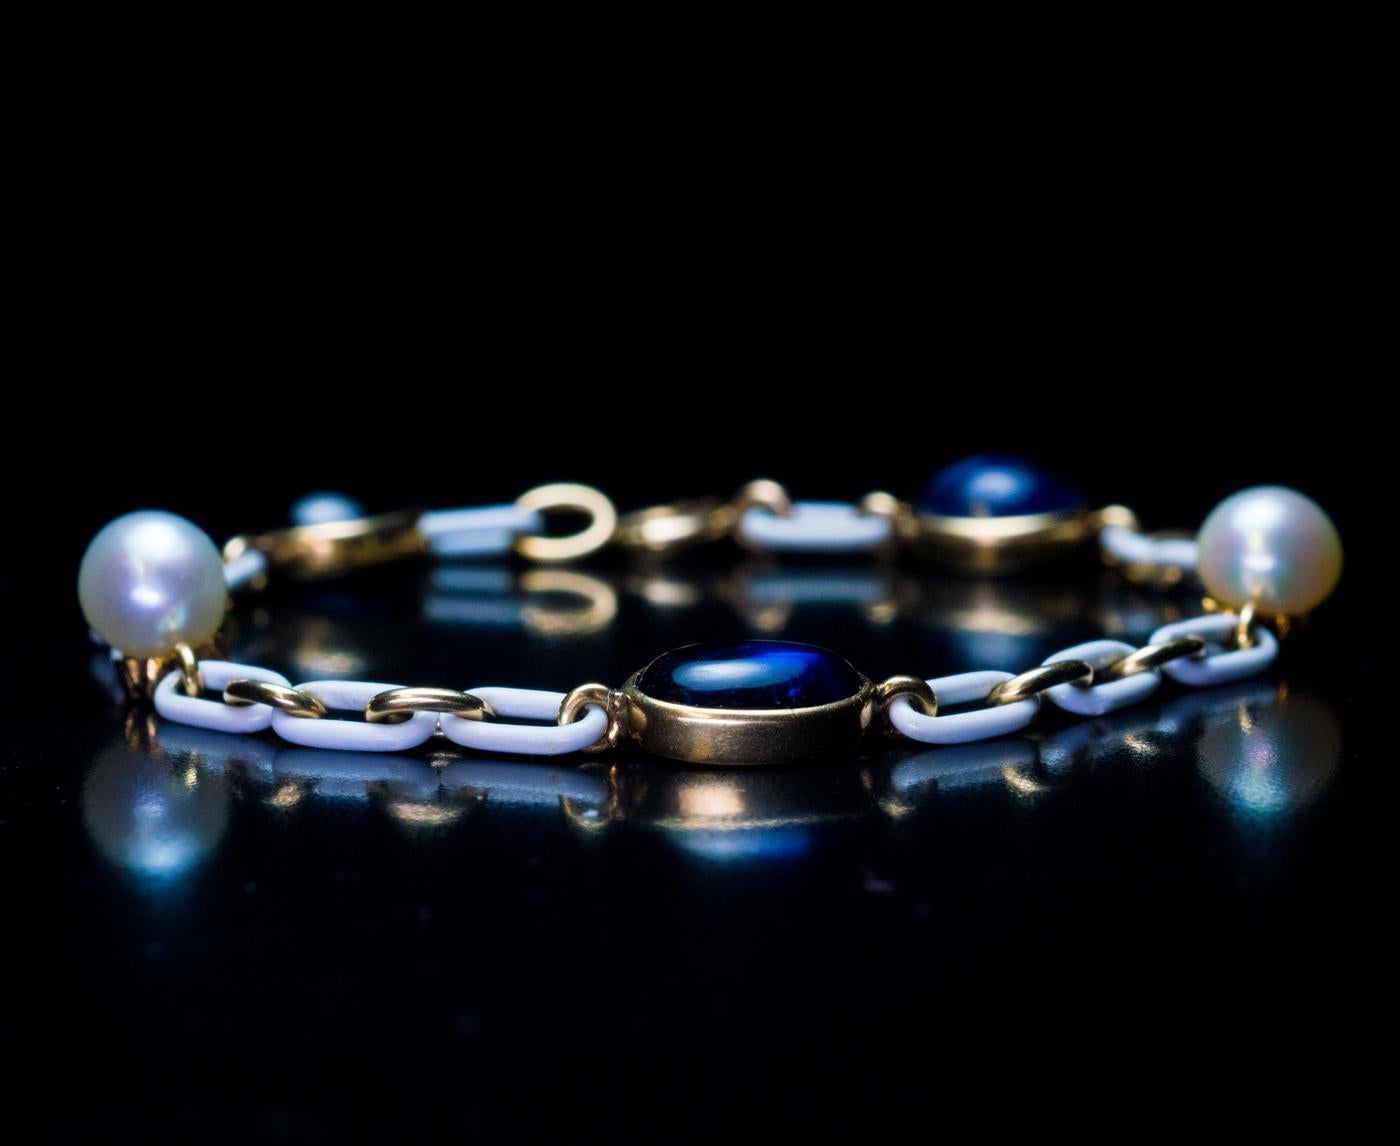 Circa 1910

This stylish and unusual Edwardian era antique bracelet is crafted in 14K gold. The wider links of the bracelet are covered with opaque white enamel. The bracelet is embellished with two pearls (6 mm each) and three cabochon cut natural